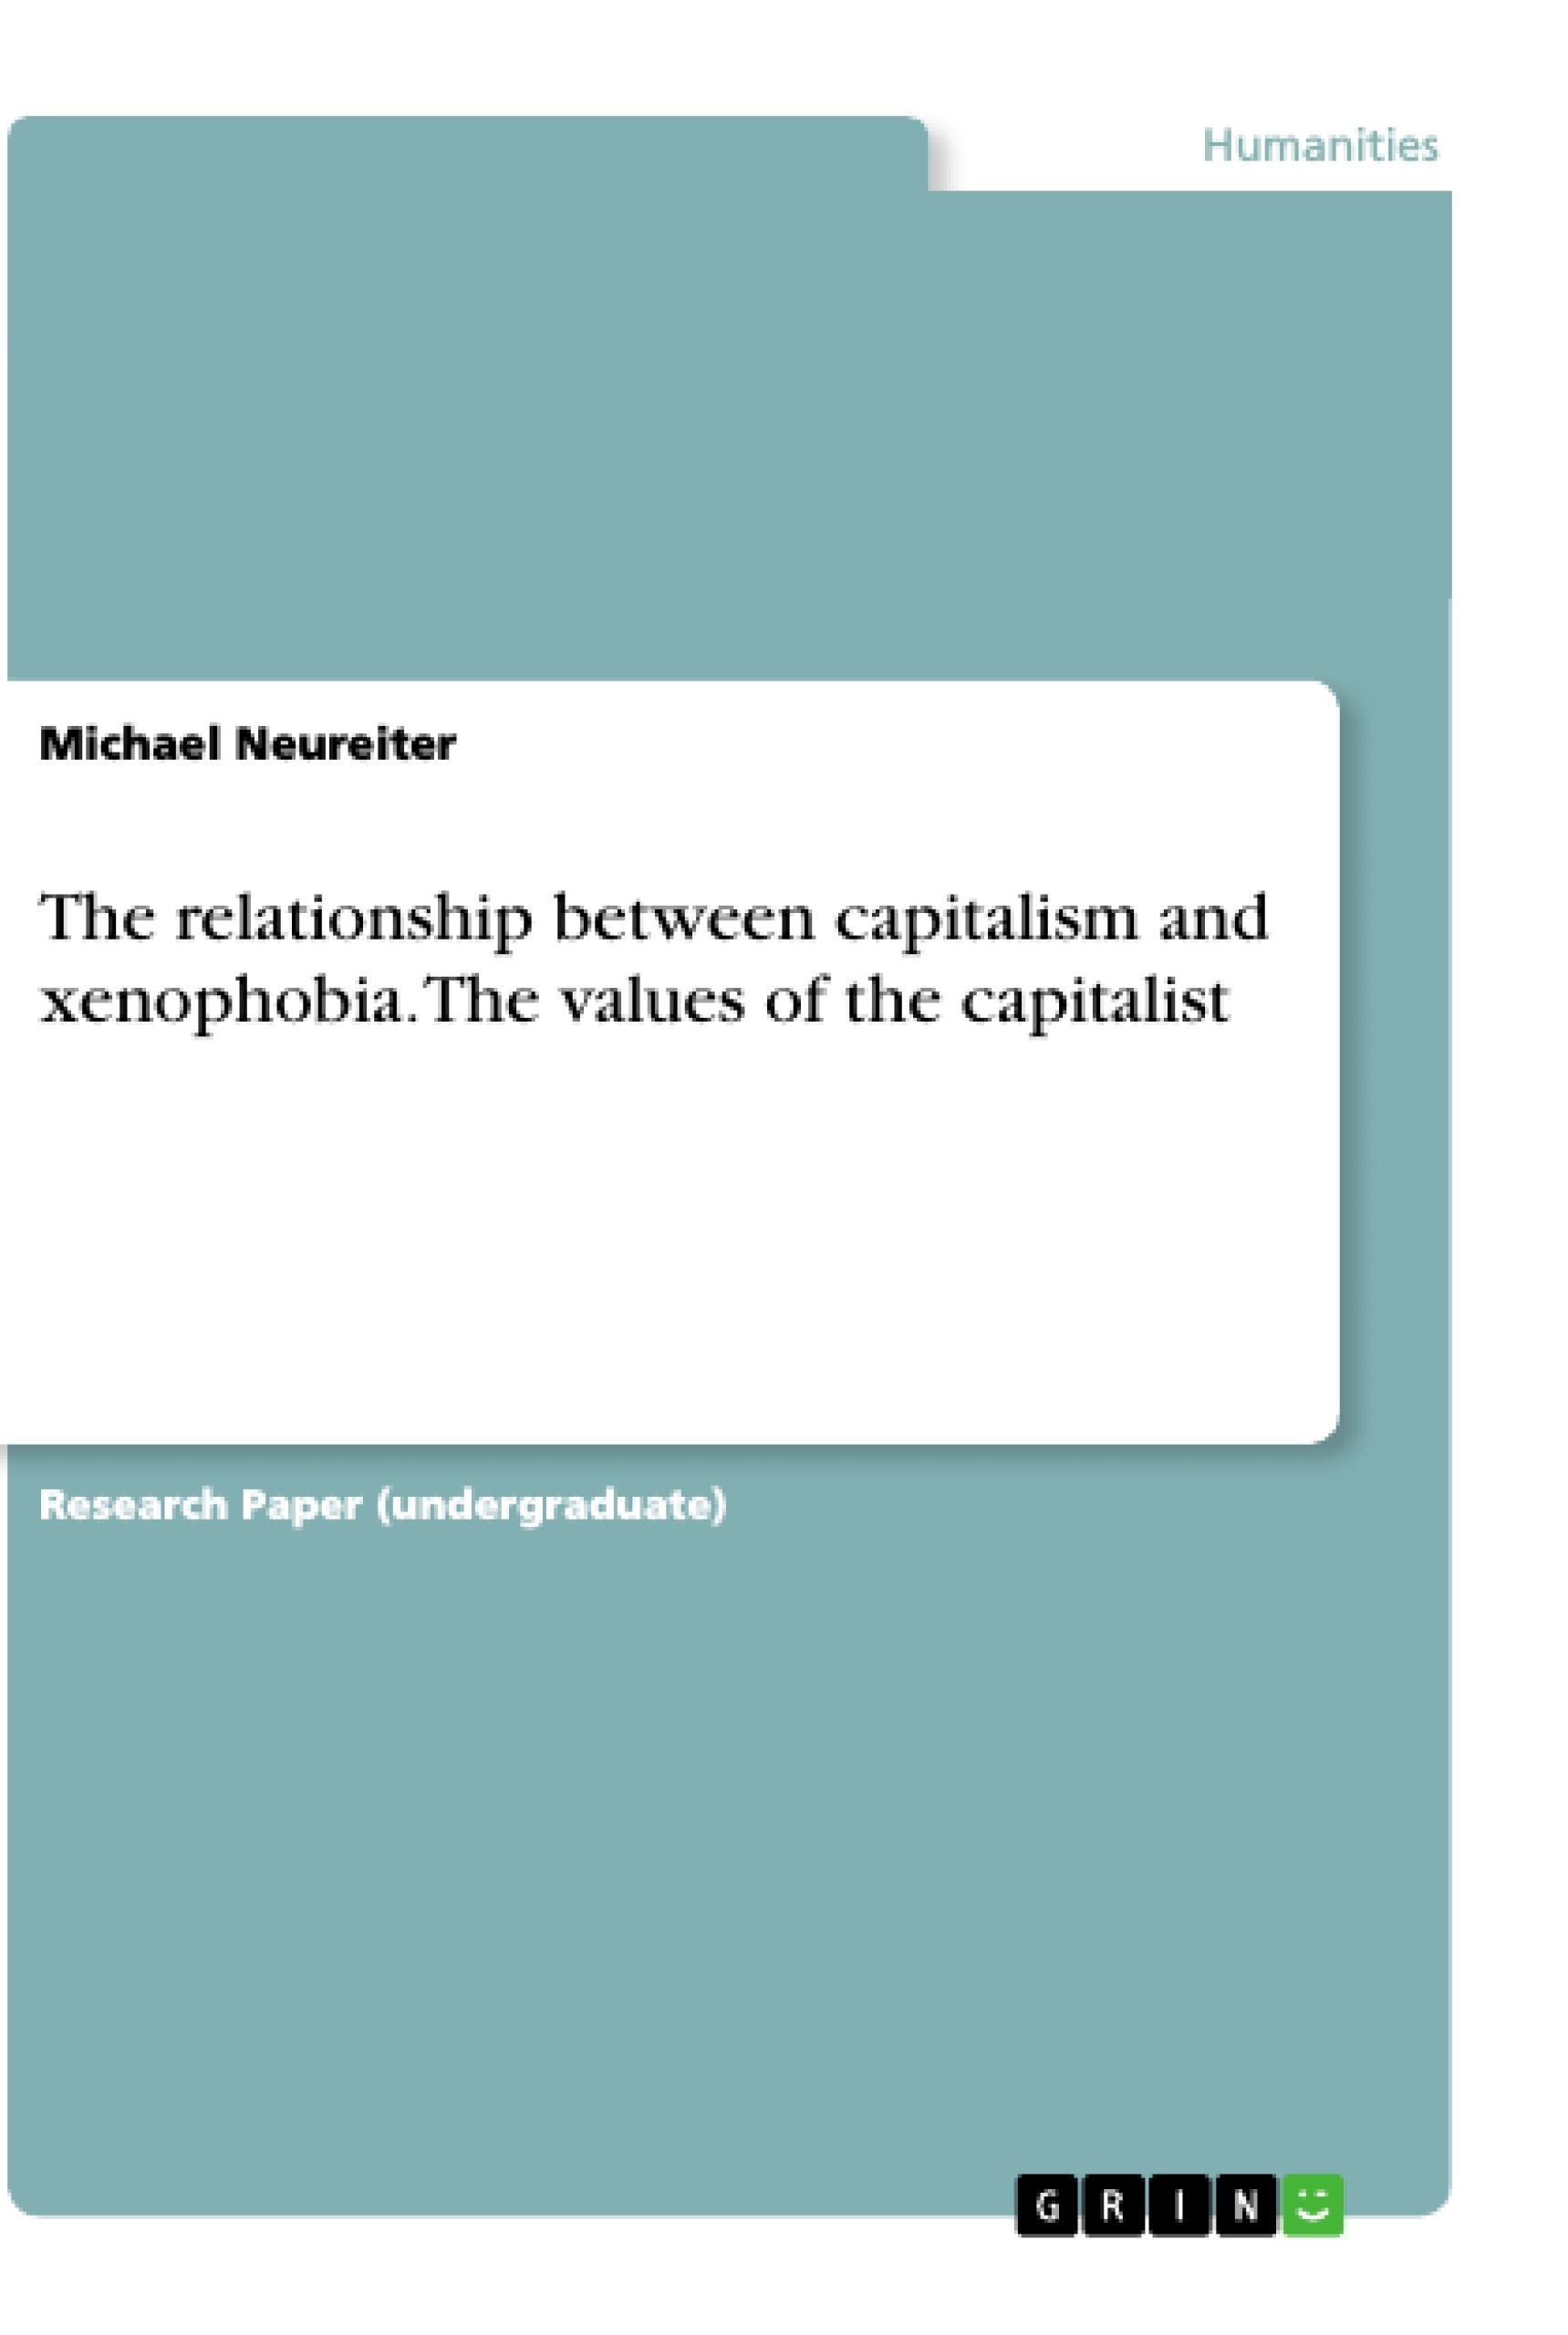 Title: The relationship between capitalism and xenophobia. The values of the capitalist